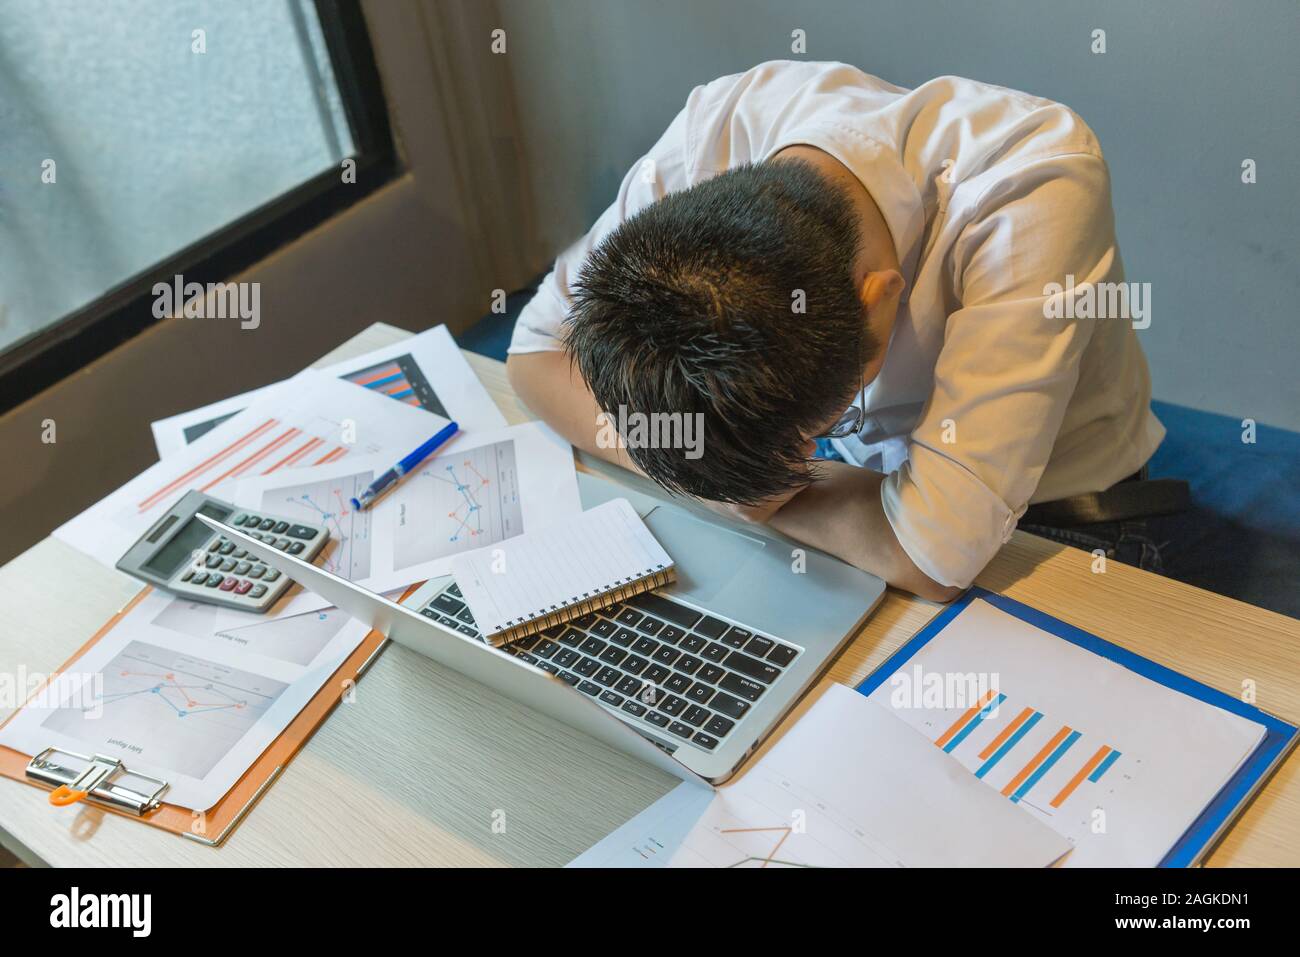 Stressed Businessman Fall Asleep On Messy Office Desk Stock Photo